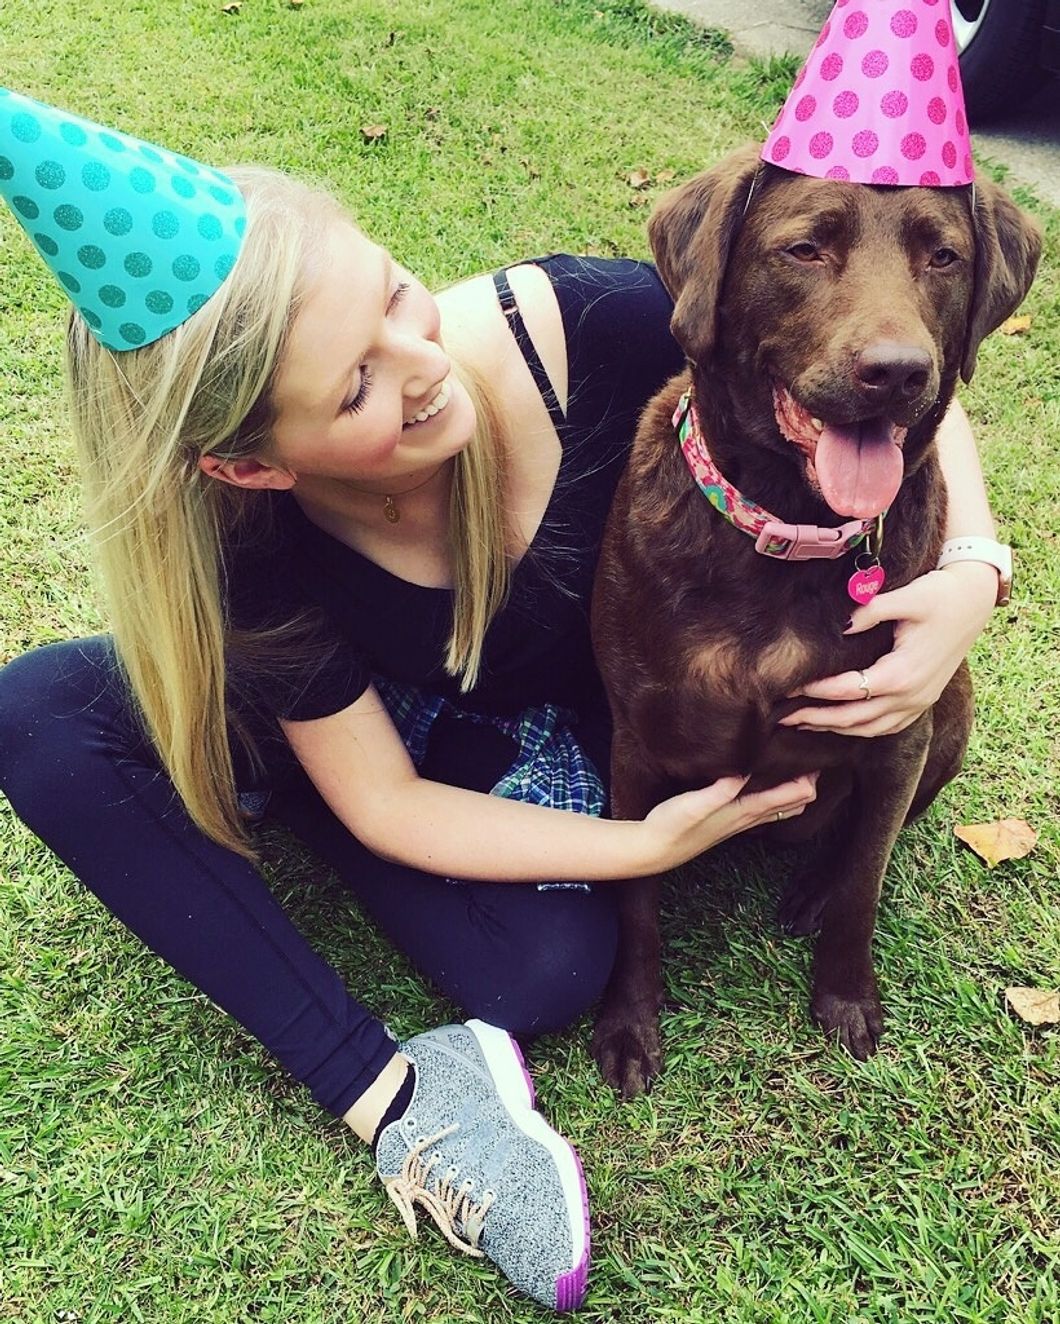 To The Best Friend You Could Ever Have, Your Pup